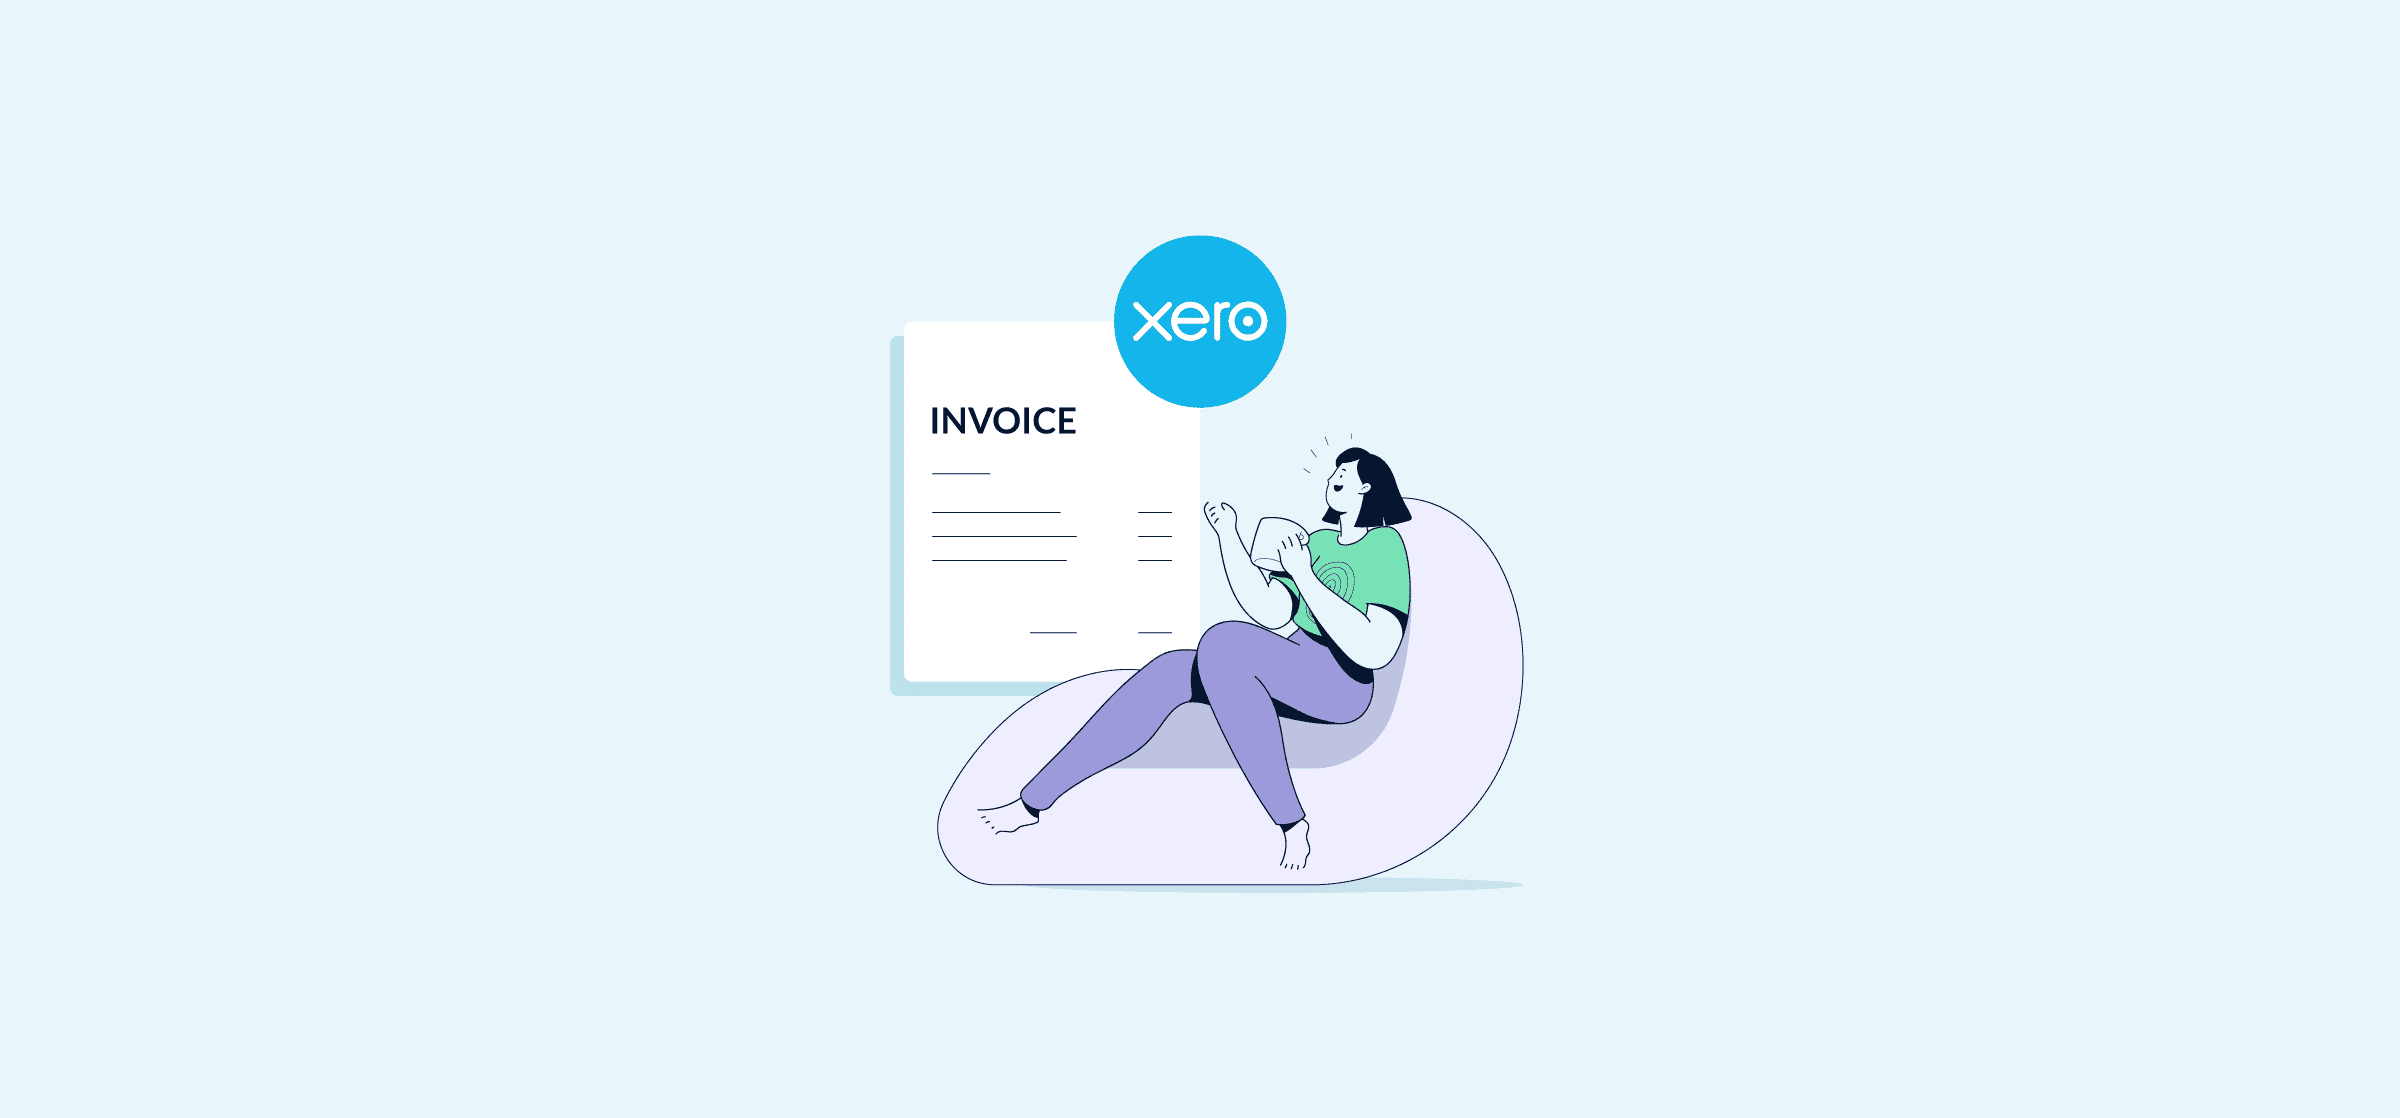 An illustration of a woman working under a Xero logo, representing Unito's guide to Xero.